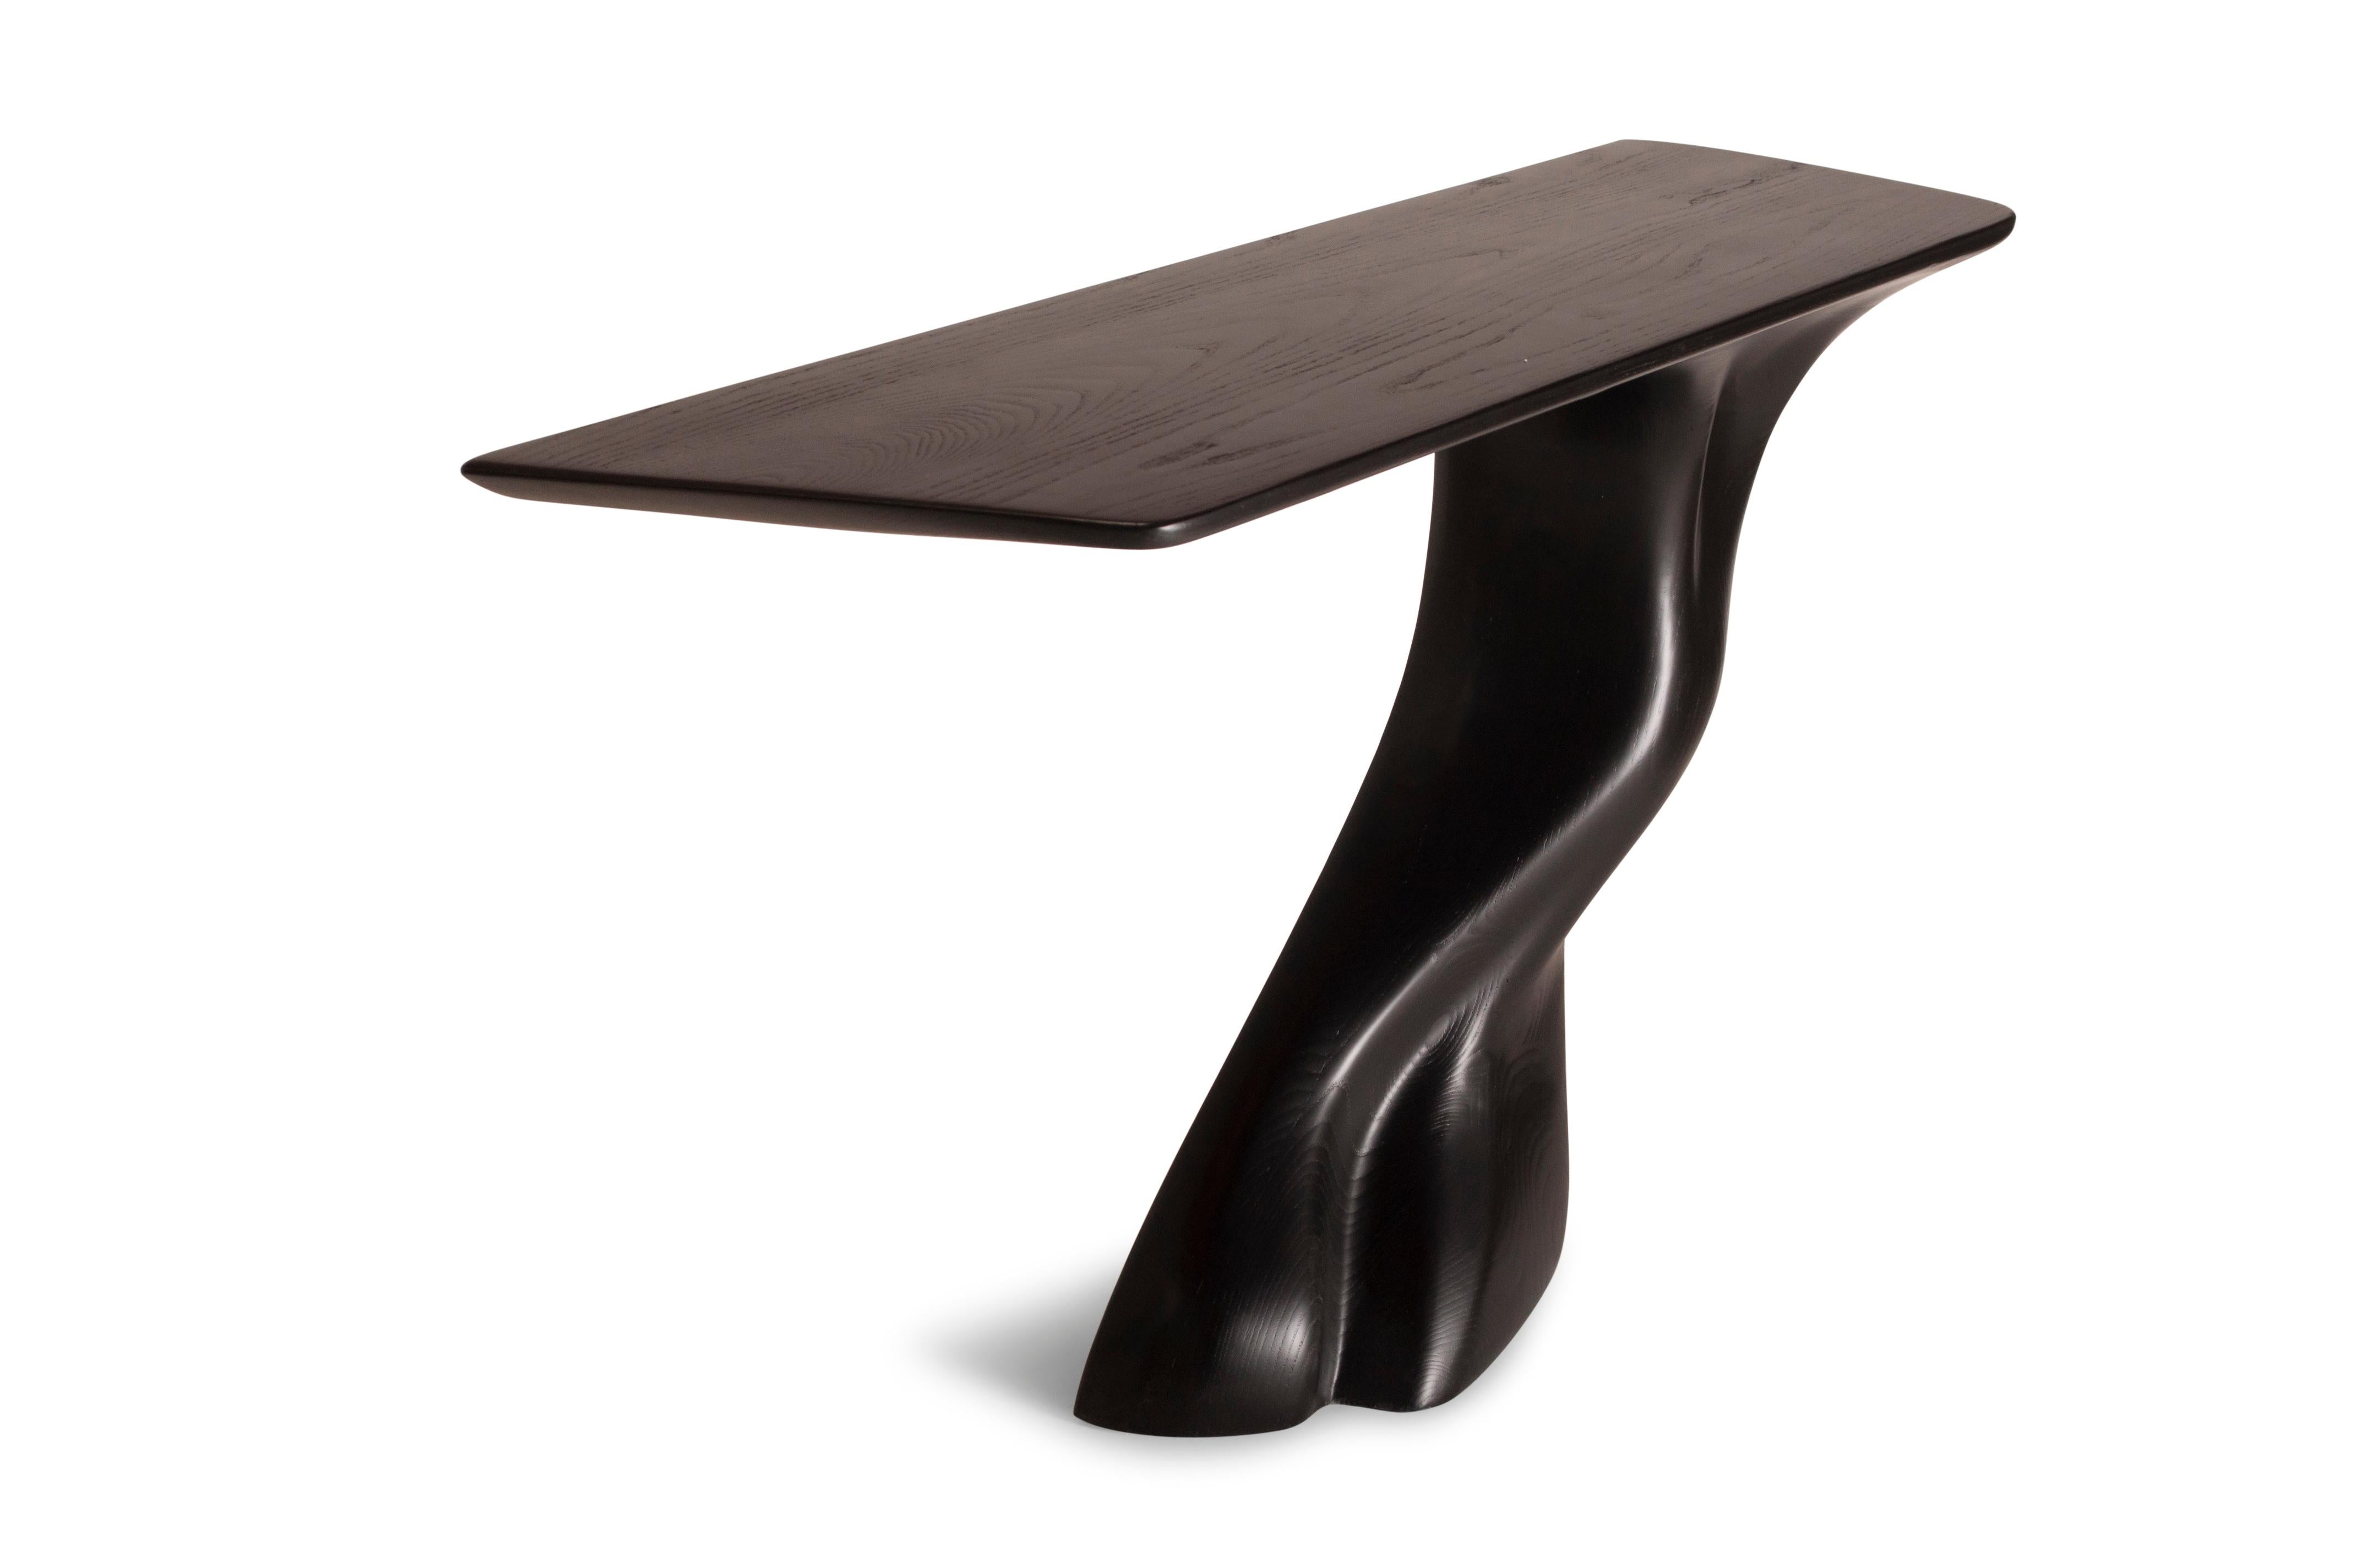 Contemporary Amorph Frolic wall mounted console in Ebony stain on Ash wood Facing Left For Sale